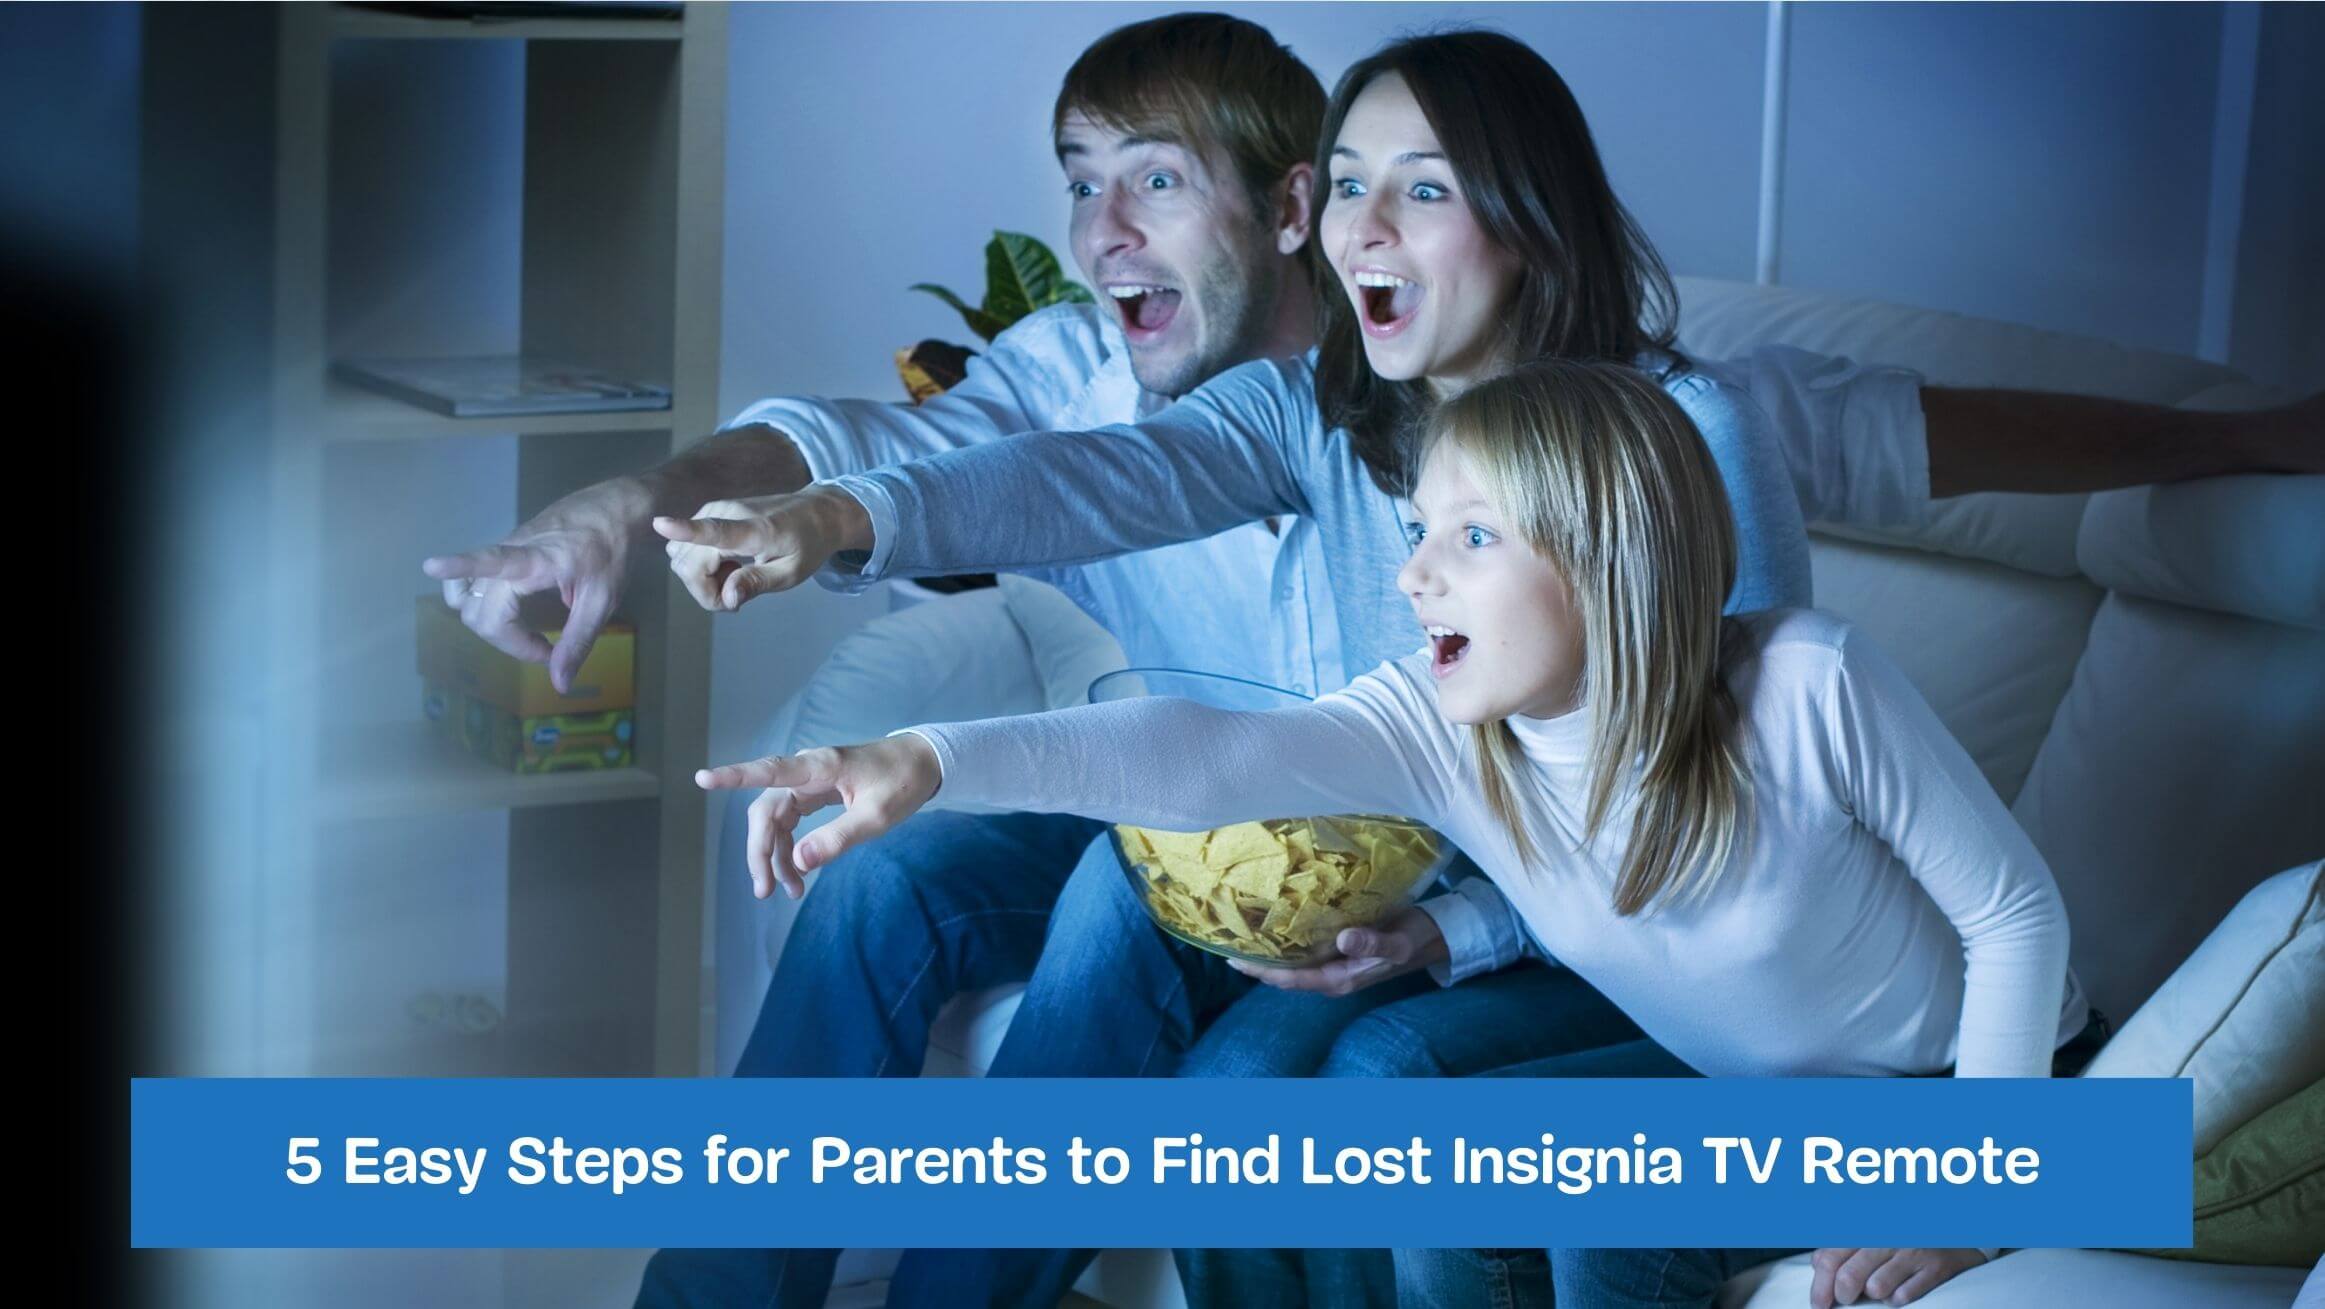 5 Easy Steps for Parents to Find Lost Insignia TV Remote